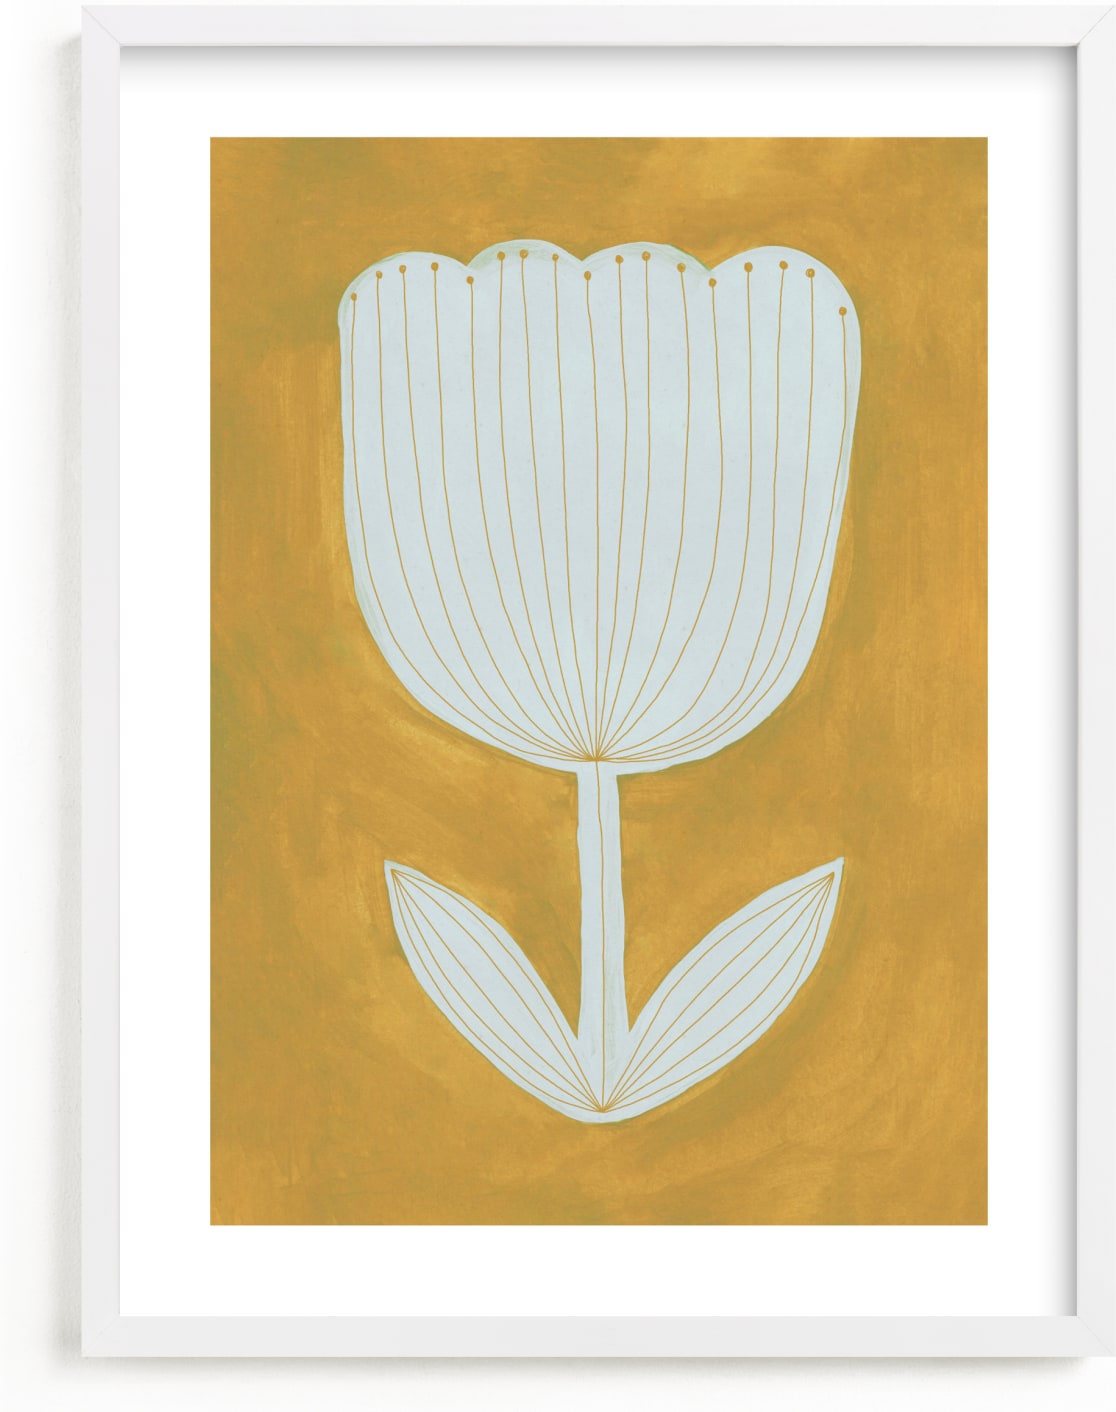 This is a white art by Alisa Galitsyna called Enchanted Tulip.